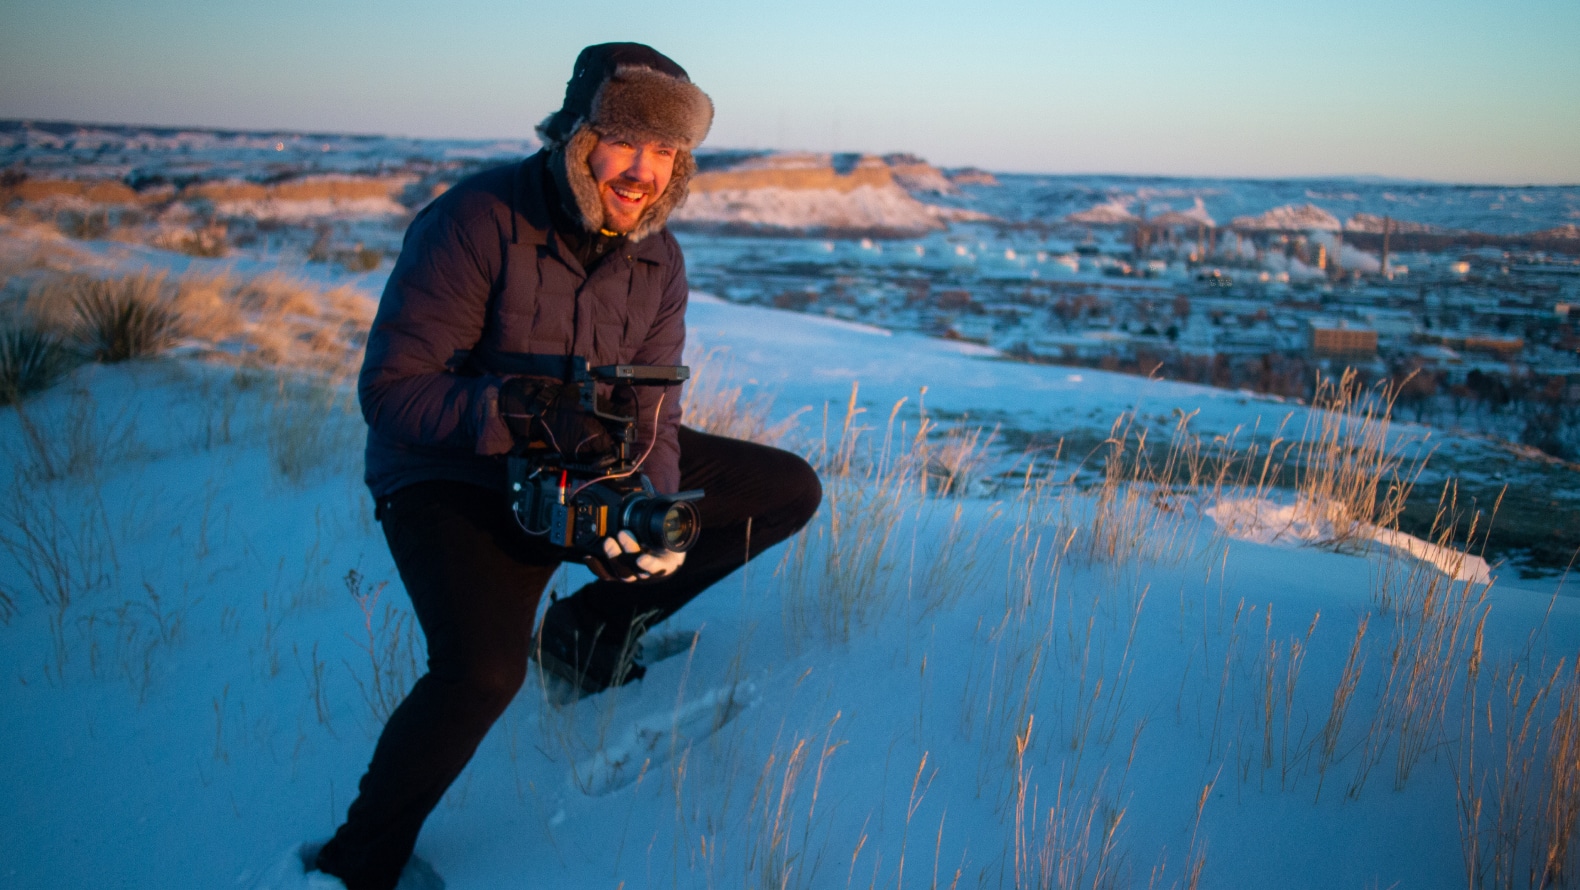 Man smiling and holding a video camera on a snow covered hill.